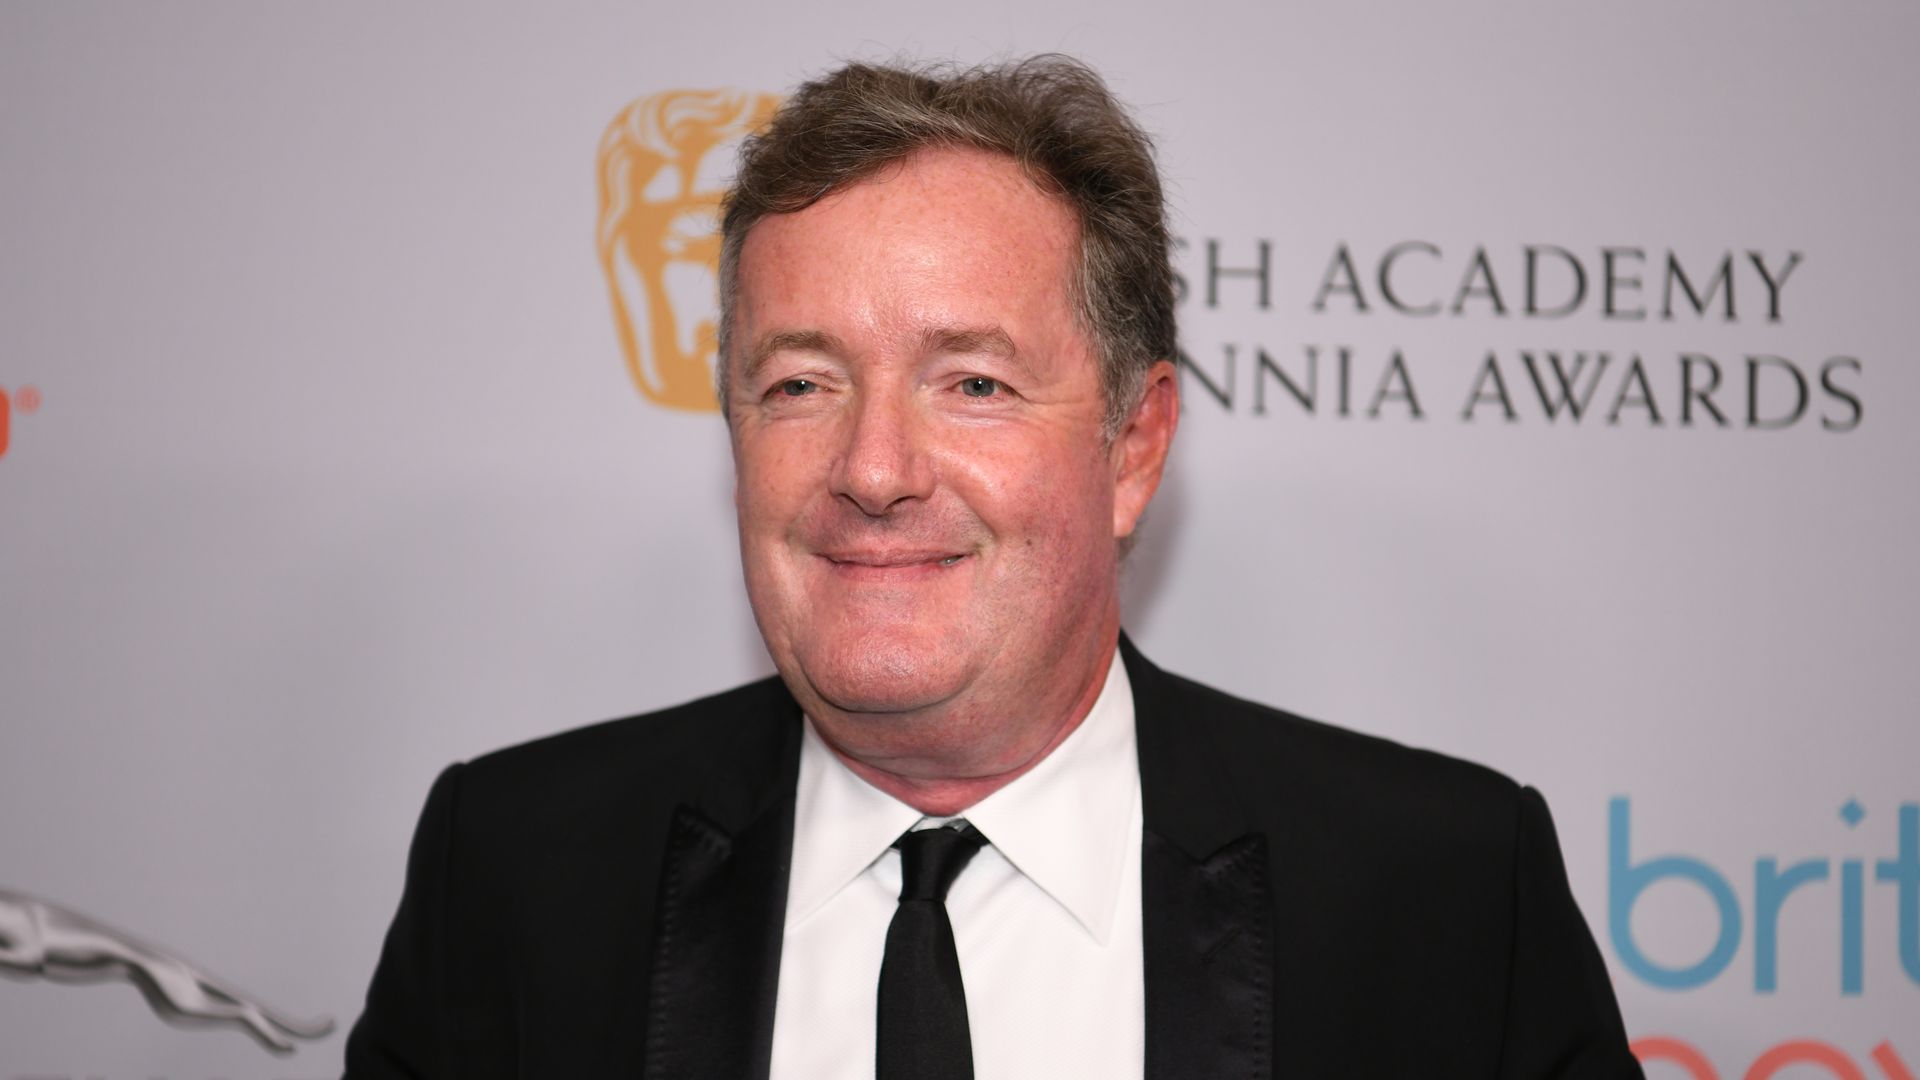 Piers Morgan attends the 2019 British Academy Britannia Awards presented by American Airlines and Jaguar Land Rover at The Beverly Hilton Hotel on October 25, 2019